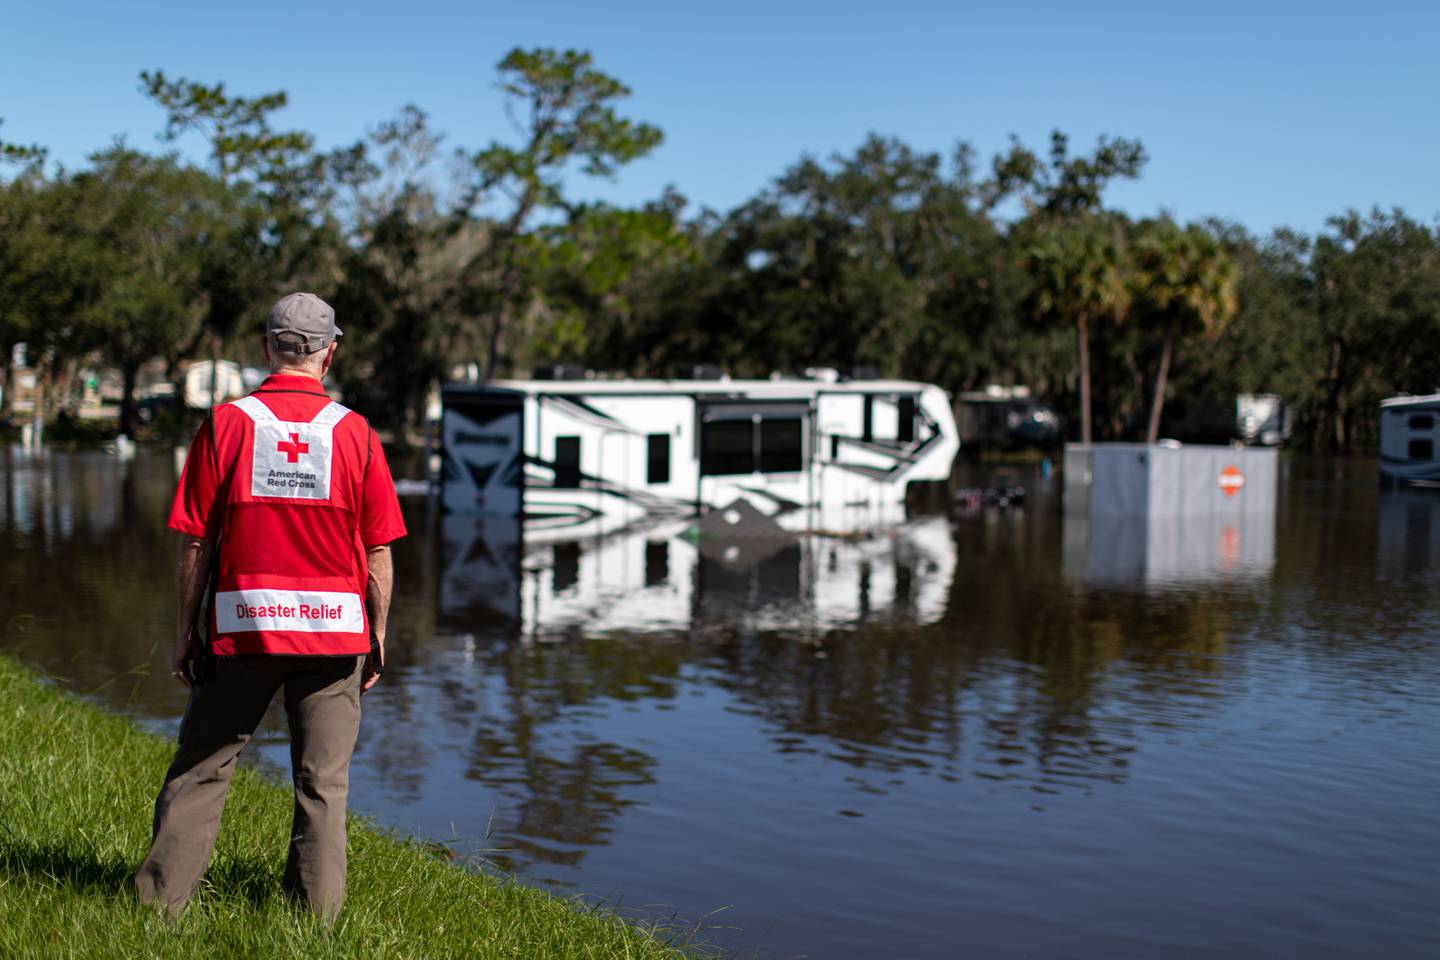 26th Sep, 2022. Florida Red Cross volunteer Dave Wagner surveys the Peace River RV and Camping Resort in Wauchula, Florida the day after Hurricane Ian tore through the state.  Dangerous conditions persisted and floodwaters continued to rise as the swollen Peace River covered sections of Highway 17, a major north-south artery.  Photo by Marko Kokic/American Red Cross